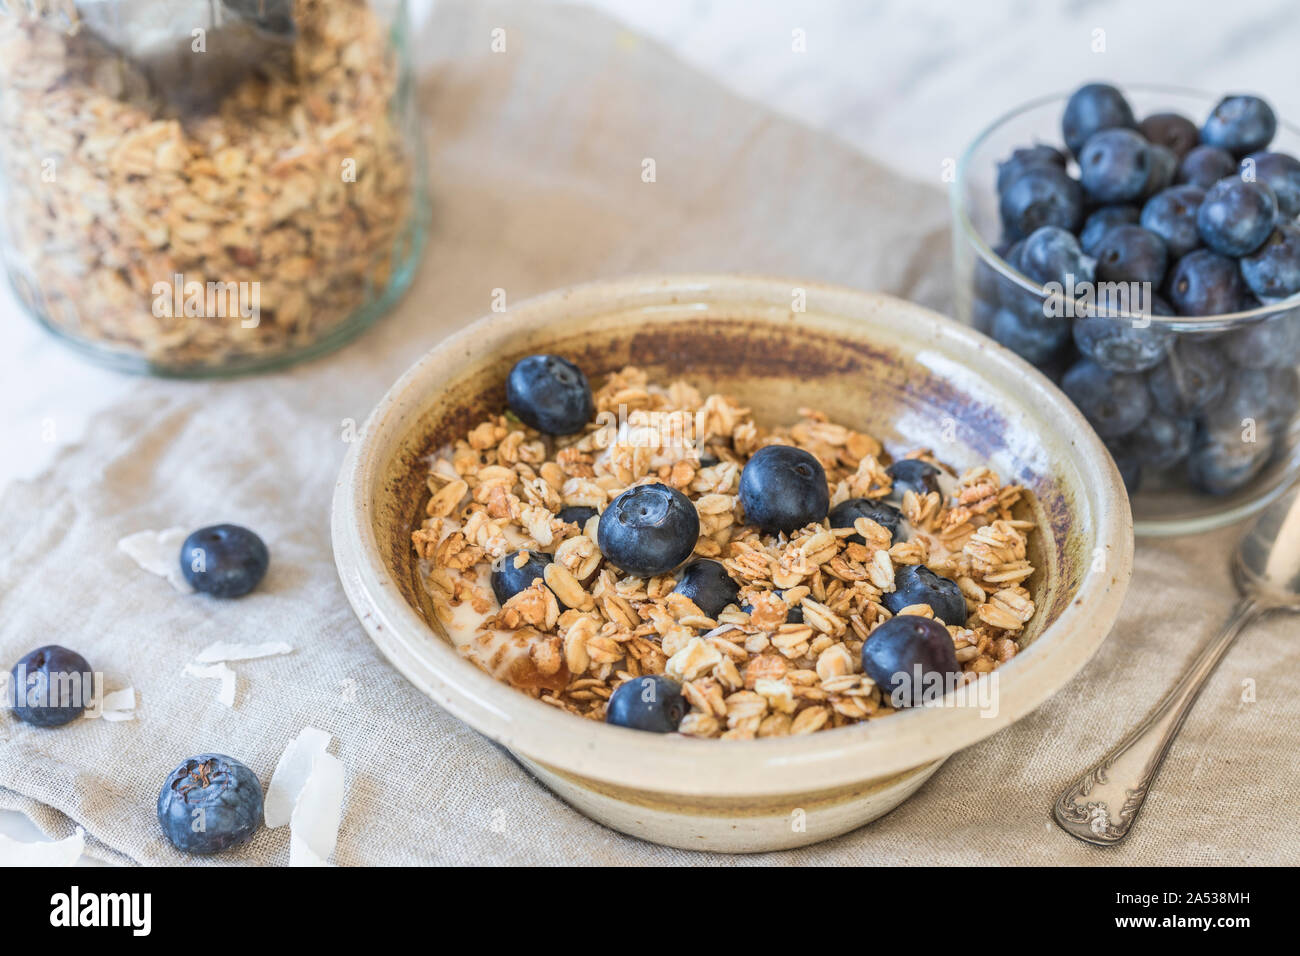 A fresh healthy breakfast with granola cereals, and fresh american blueberries.  There is a bowl of blueberries next to the granola bowl, and a glass Stock Photo